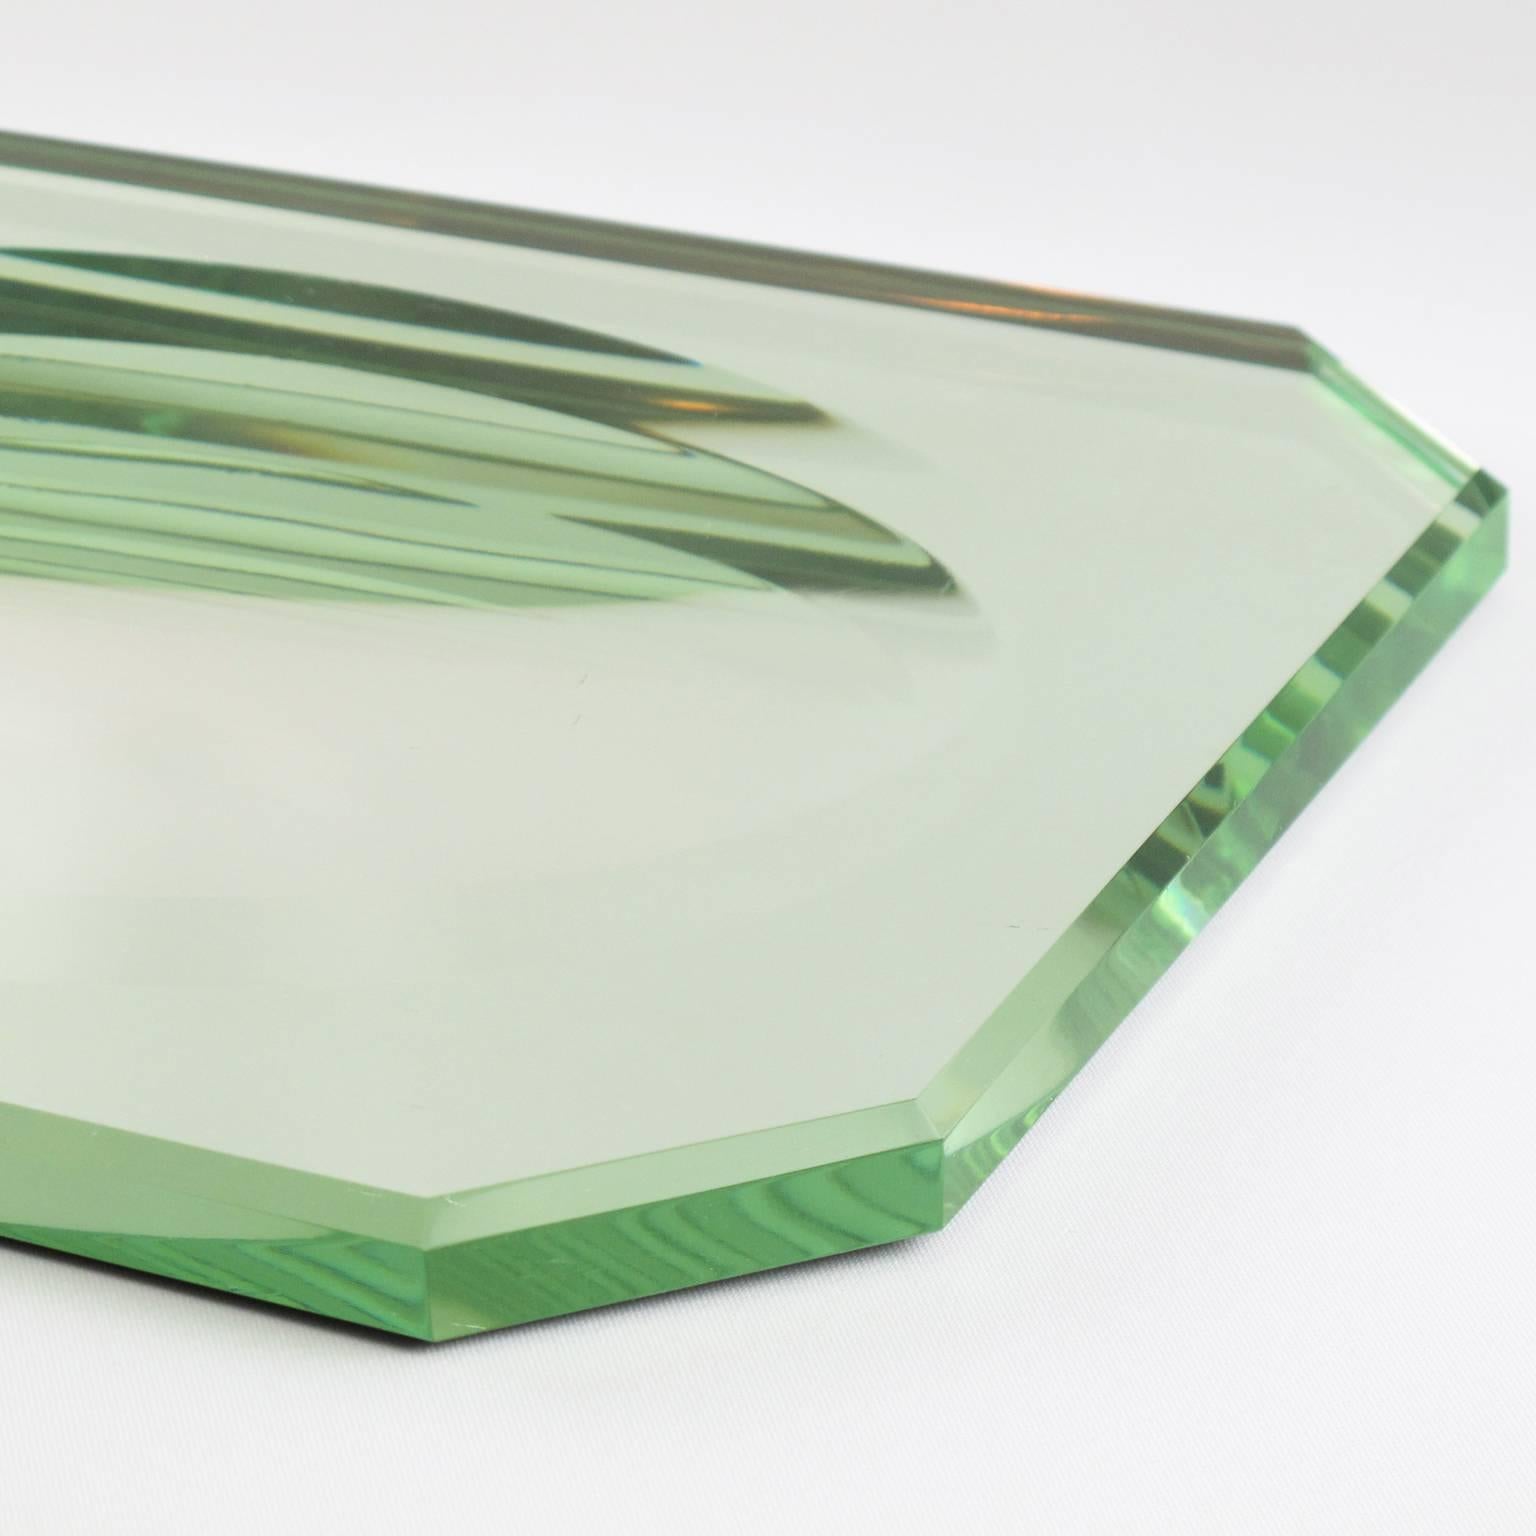 Mid-20th Century French Art Deco Mirrored Glass Tray Platter Centrepiece by Jean Luce, 1930s